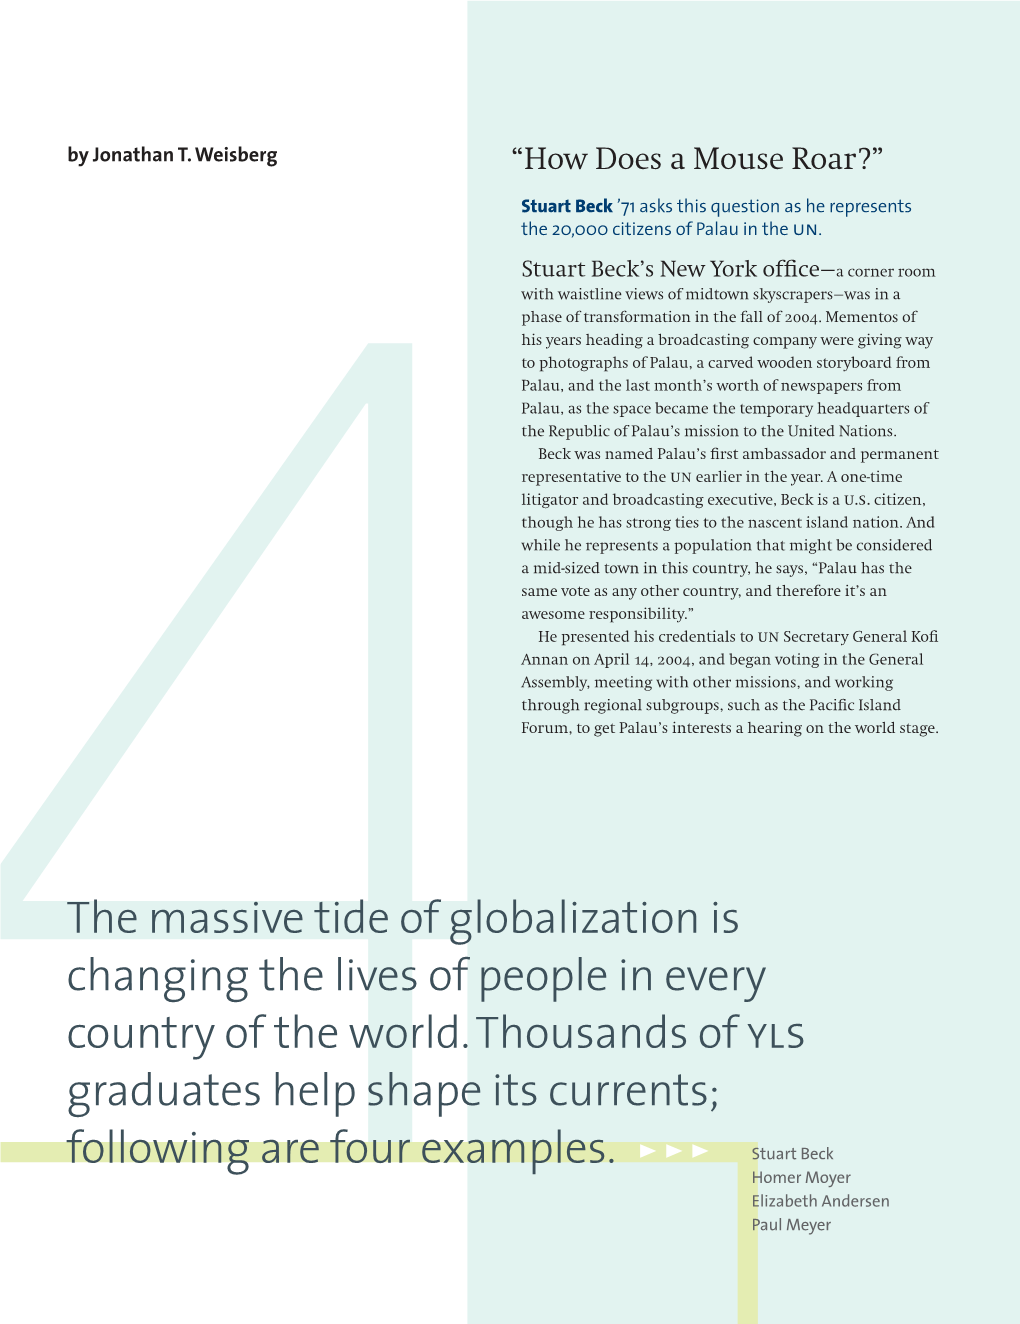 4The Massive Tide of Globalization Is Changing the Lives of People in Every Country of the World. Thousands of Yls Graduates